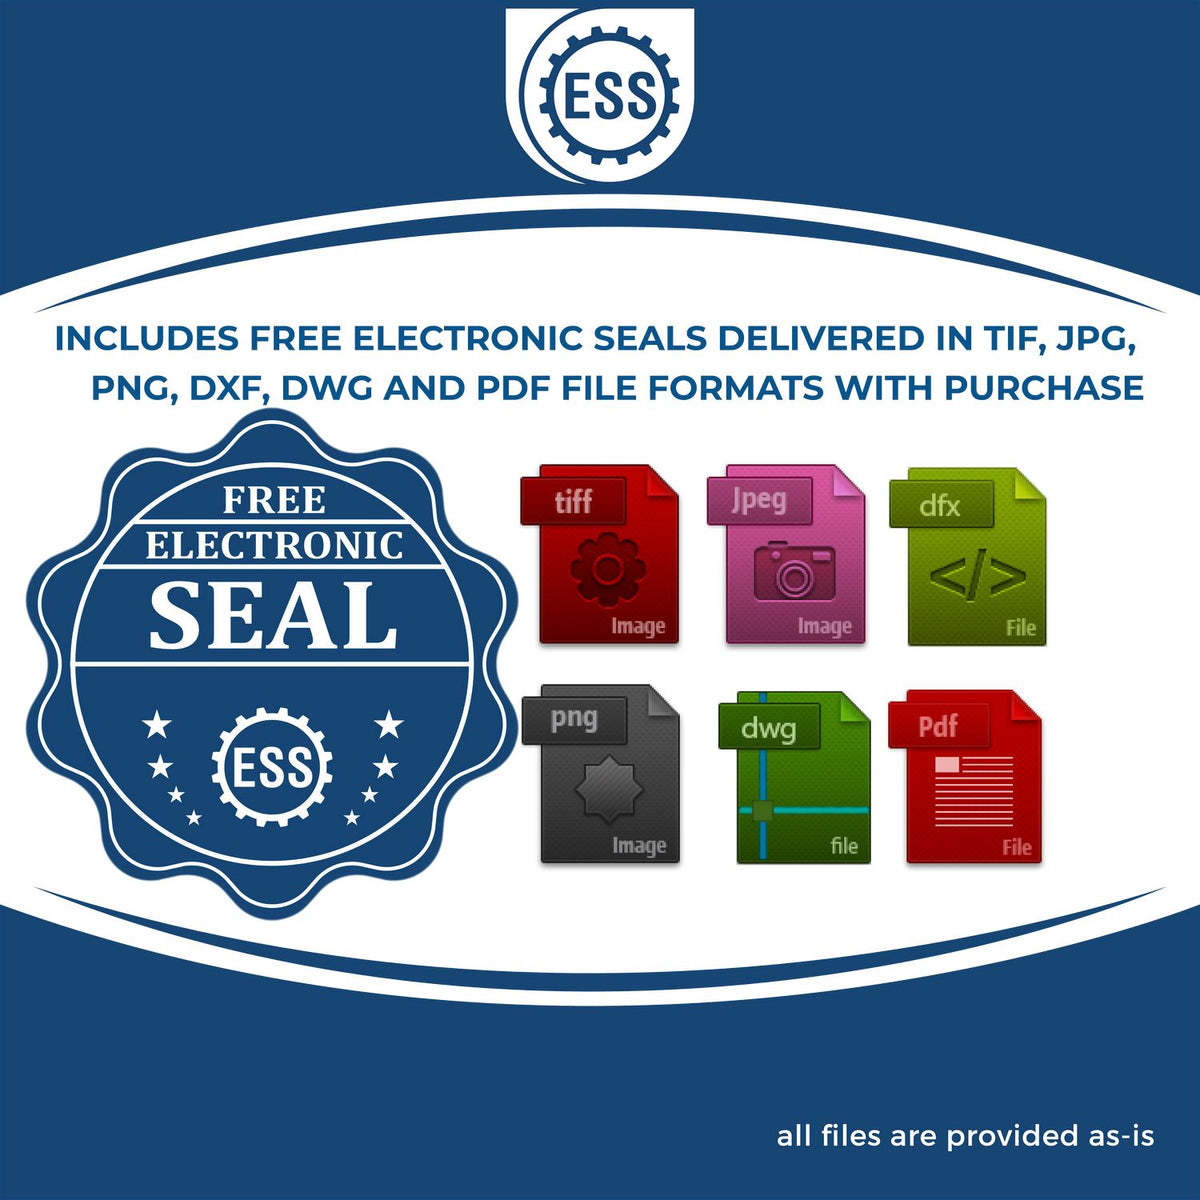 An infographic for the free electronic seal for the Alabama Professional Engineer Seal Stamp illustrating the different file type icons such as DXF, DWG, TIF, JPG and PNG.